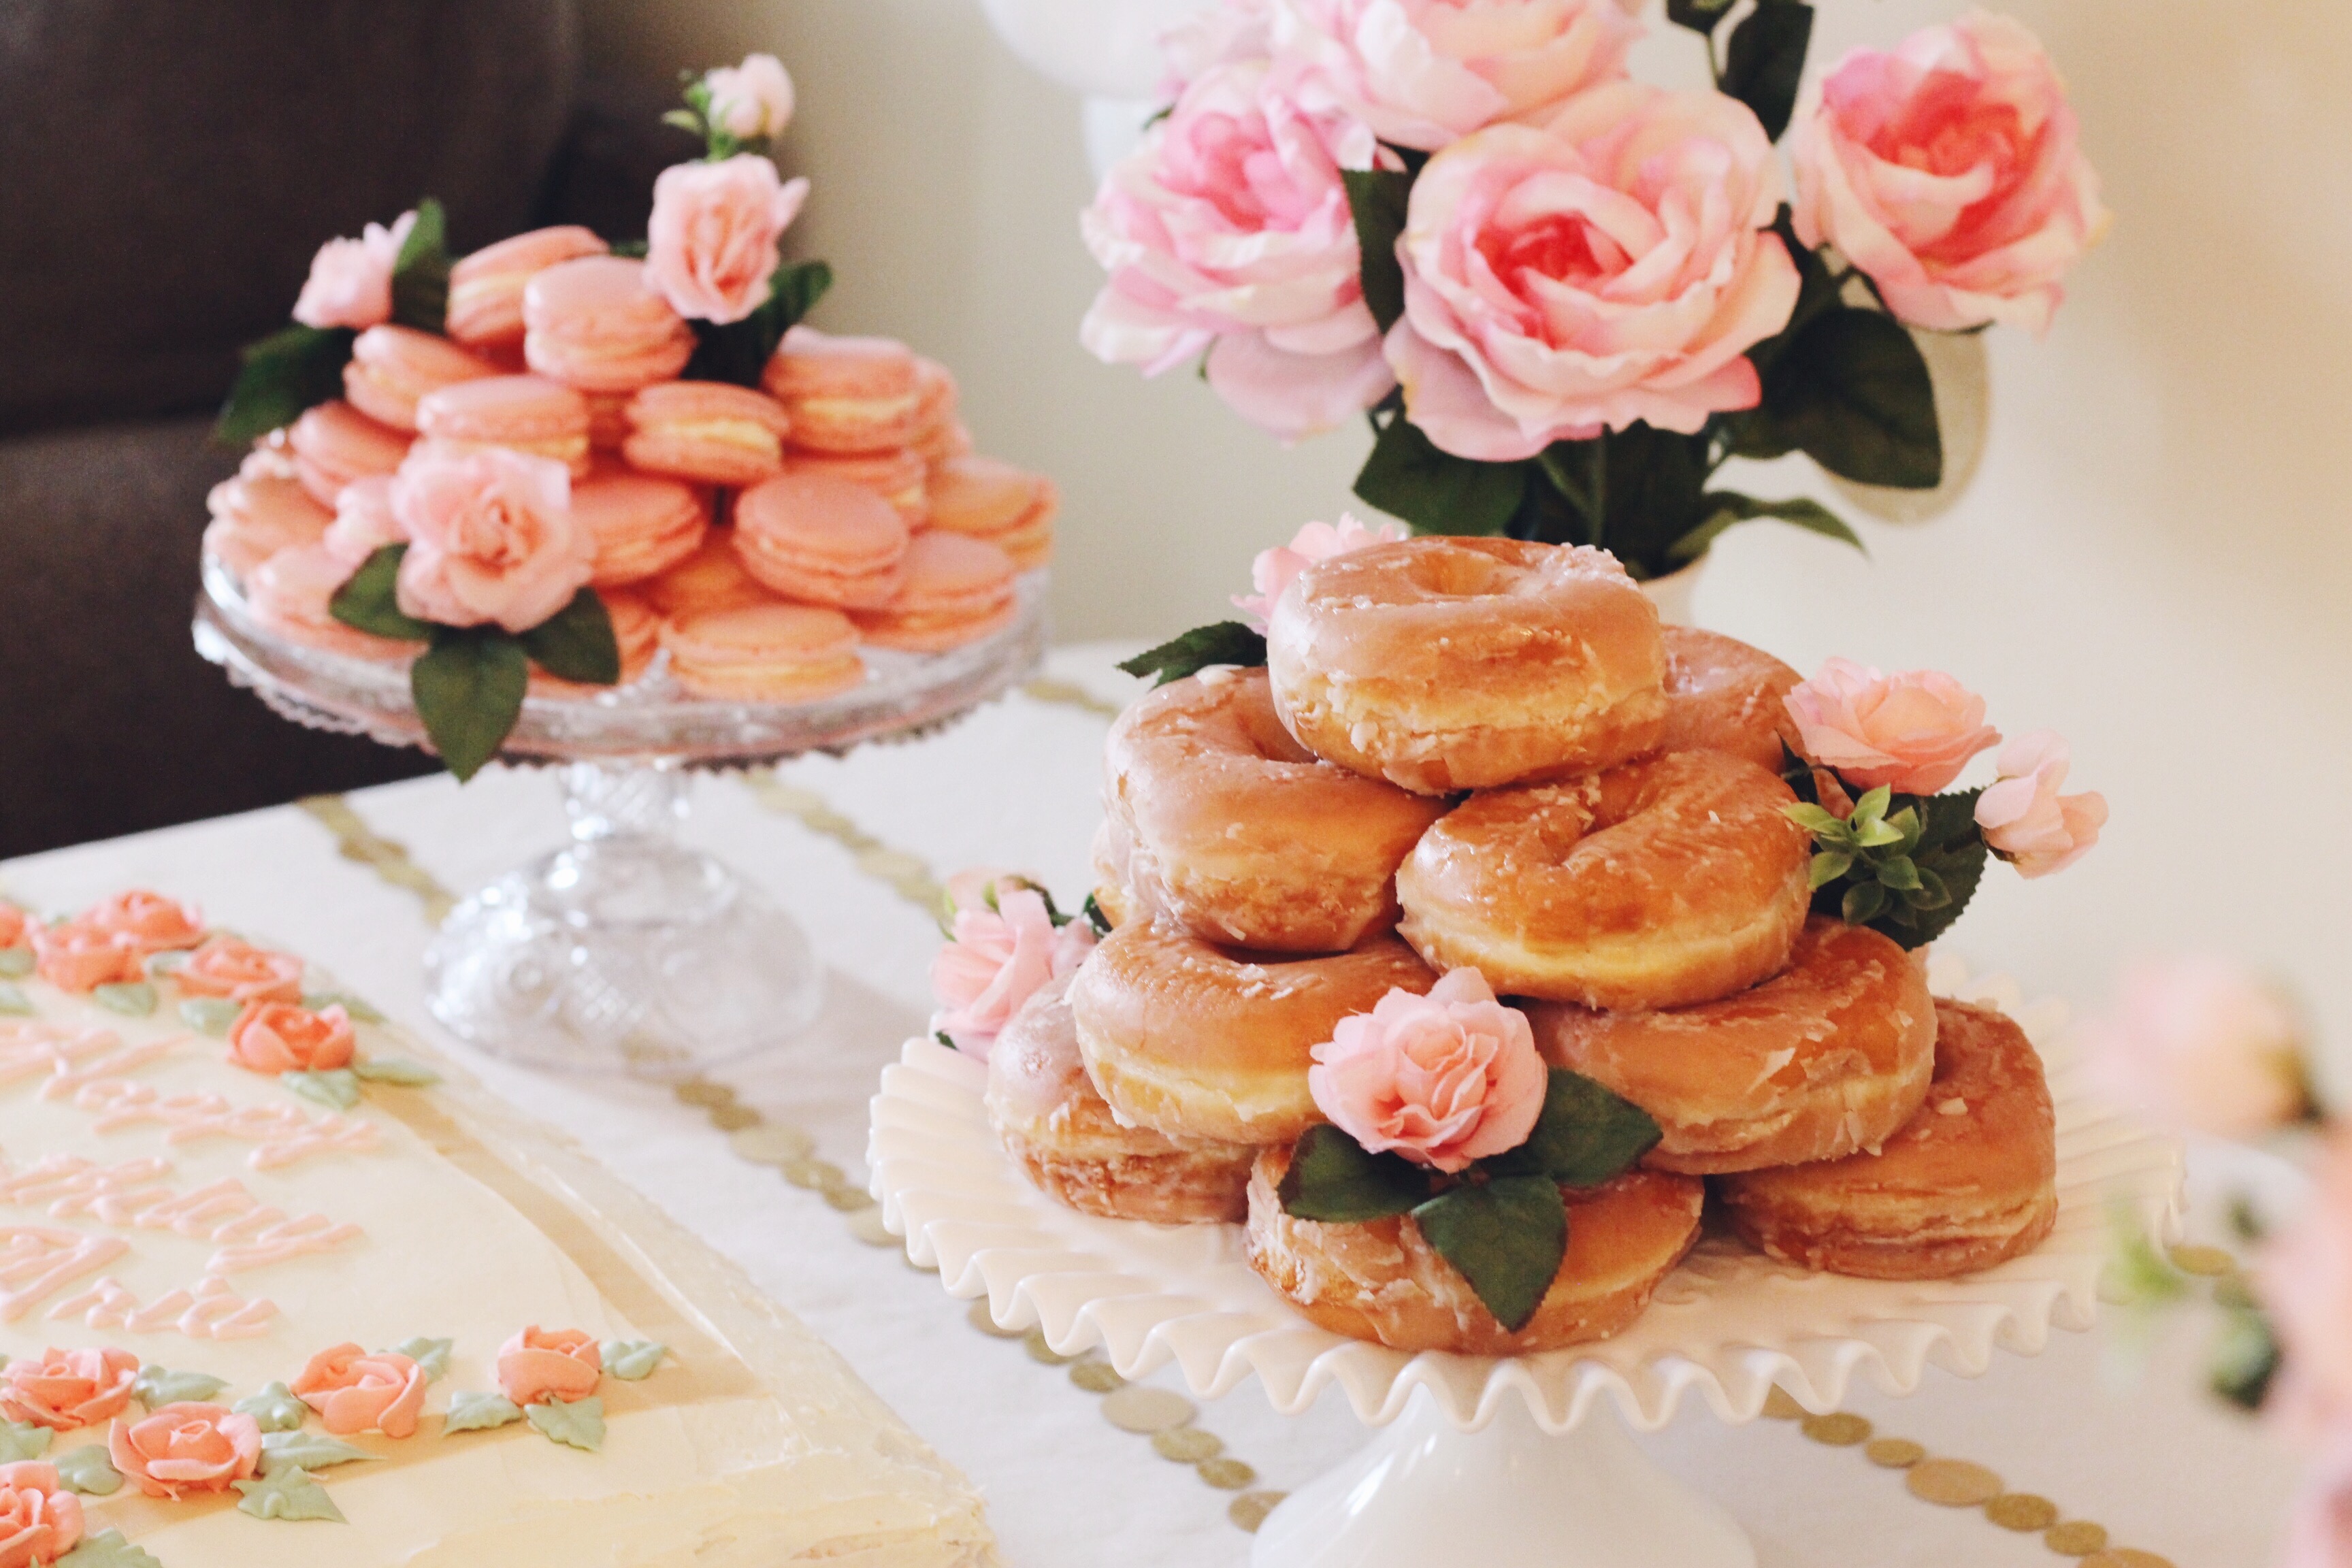 diy party pink floral gold polka dot first birthday party macarons donuts smash cake birthday cake balloon arch